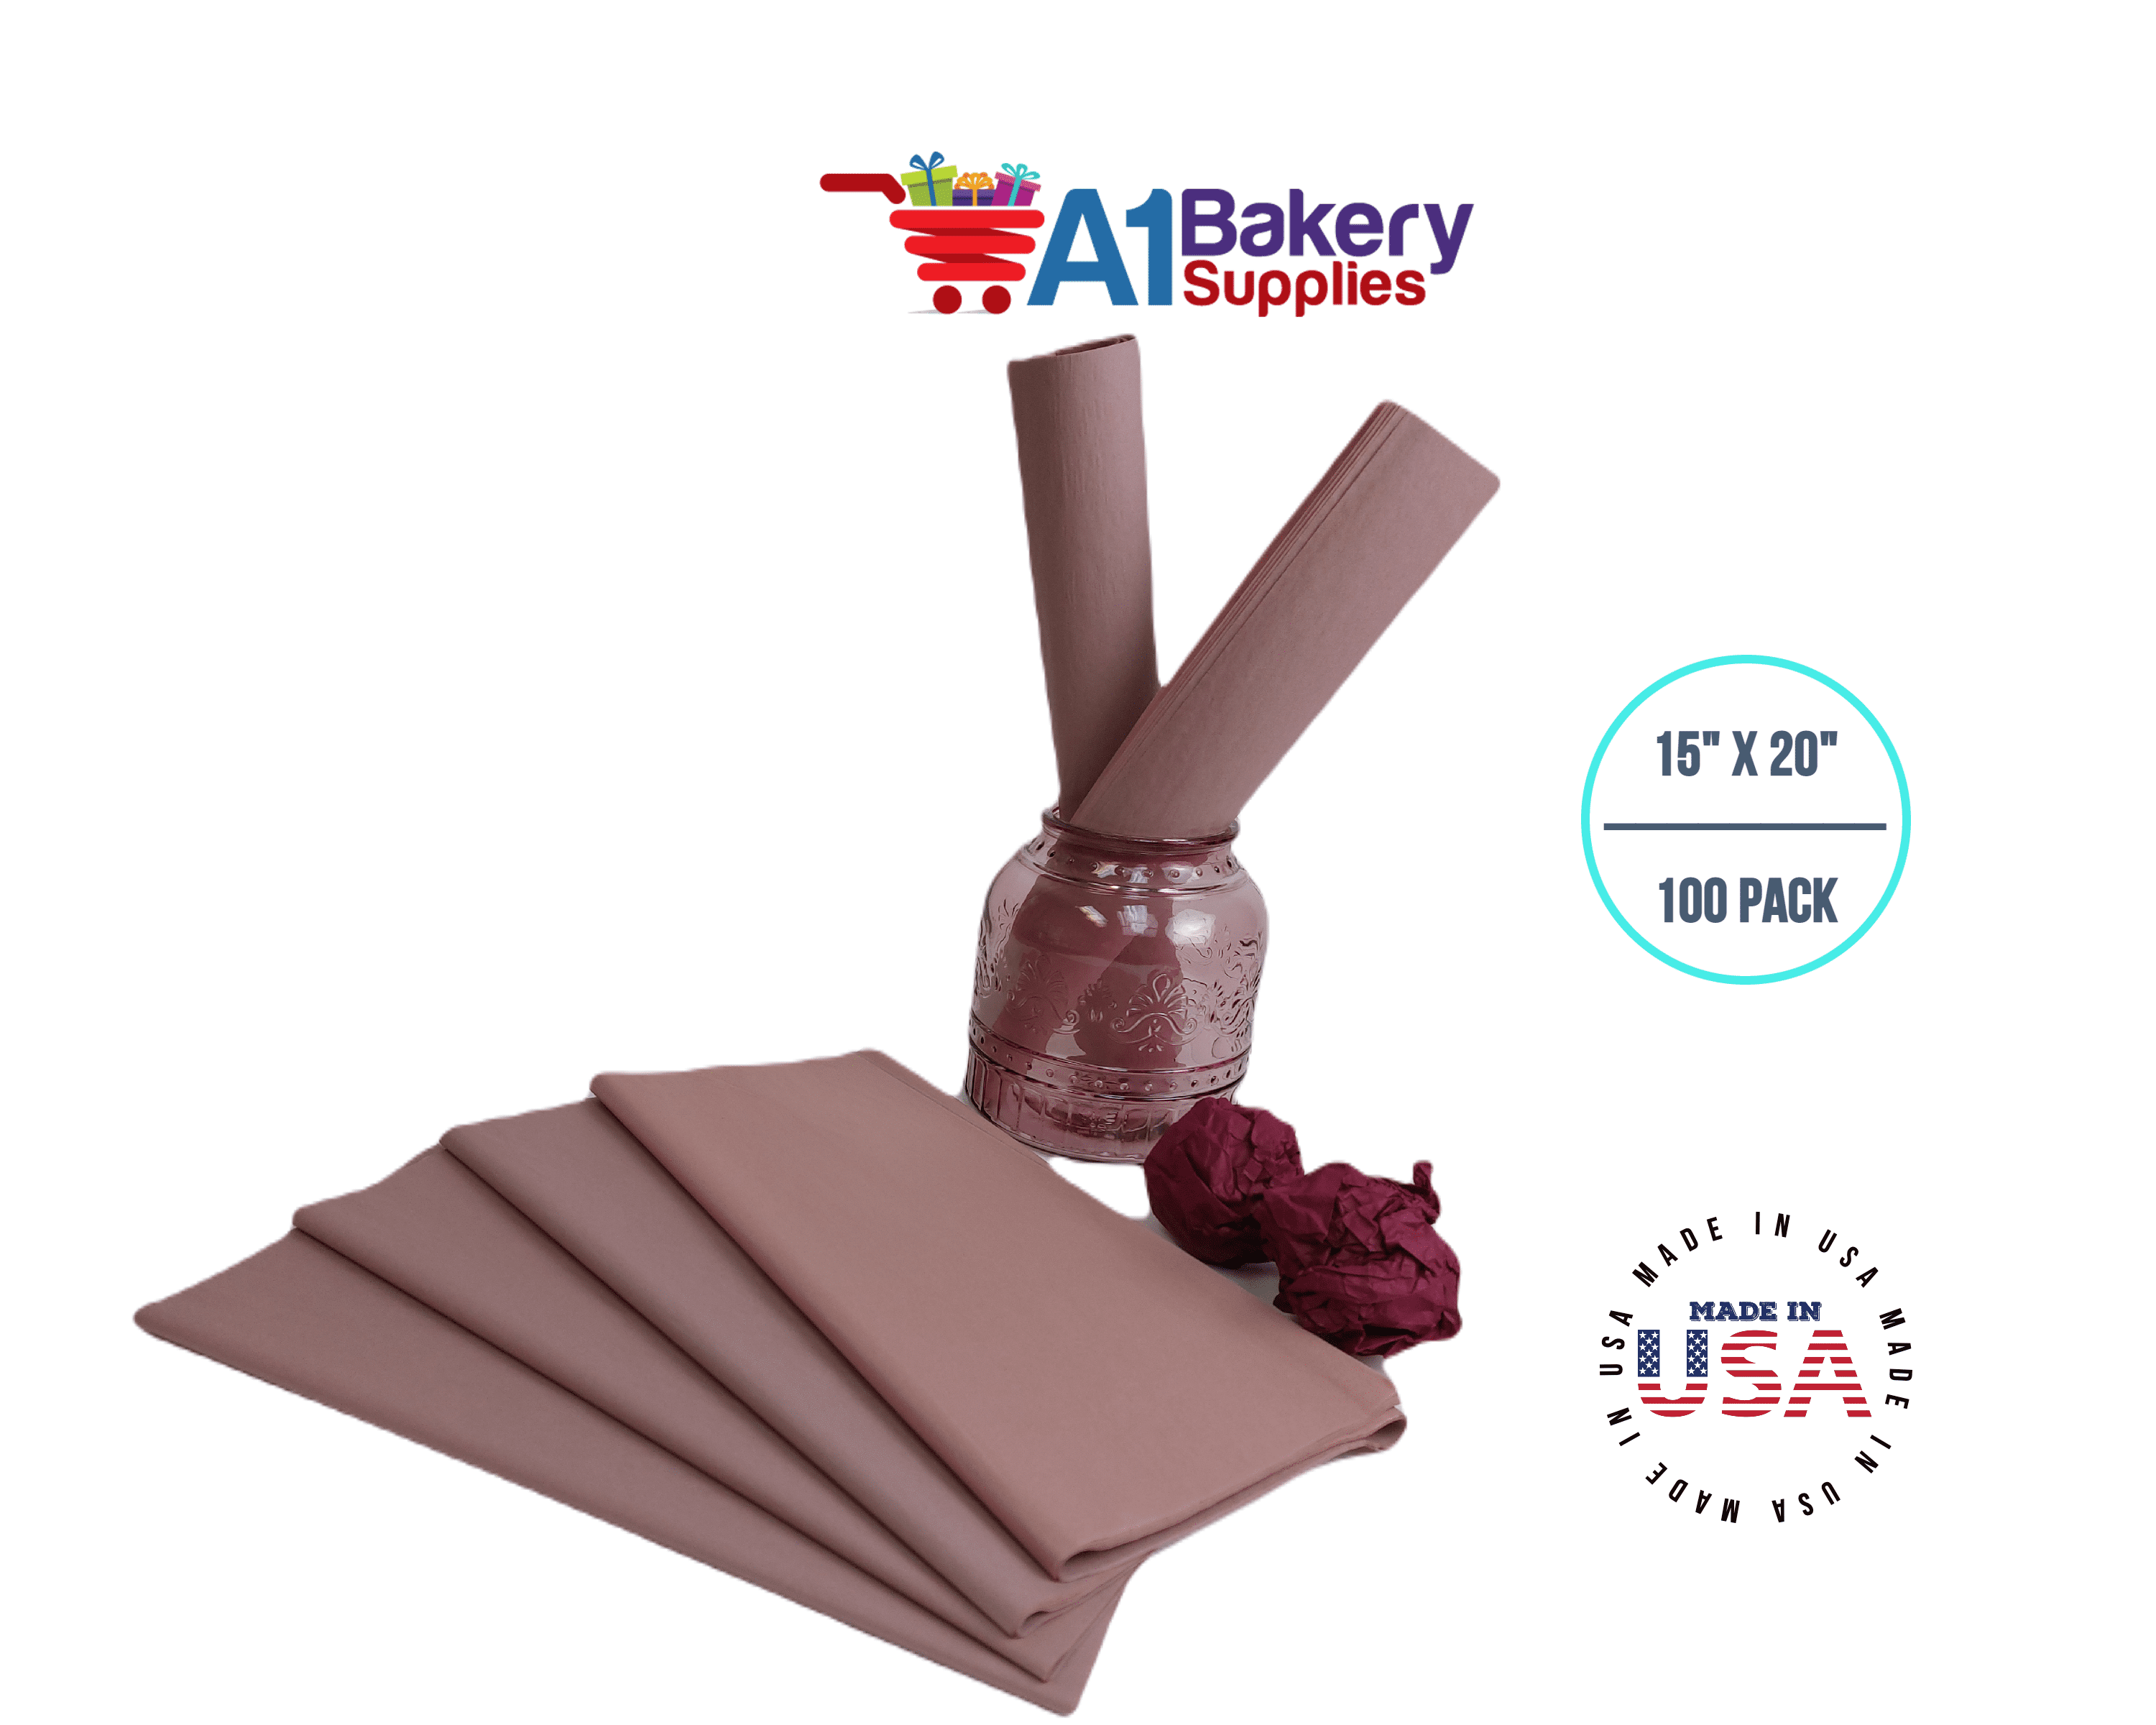  Premium Quality Gift Wrap Tissue Paper A1 bakery supplies (Rose  Gold 15x20 100 Pack) Quality Paper Made in USA : Health & Household